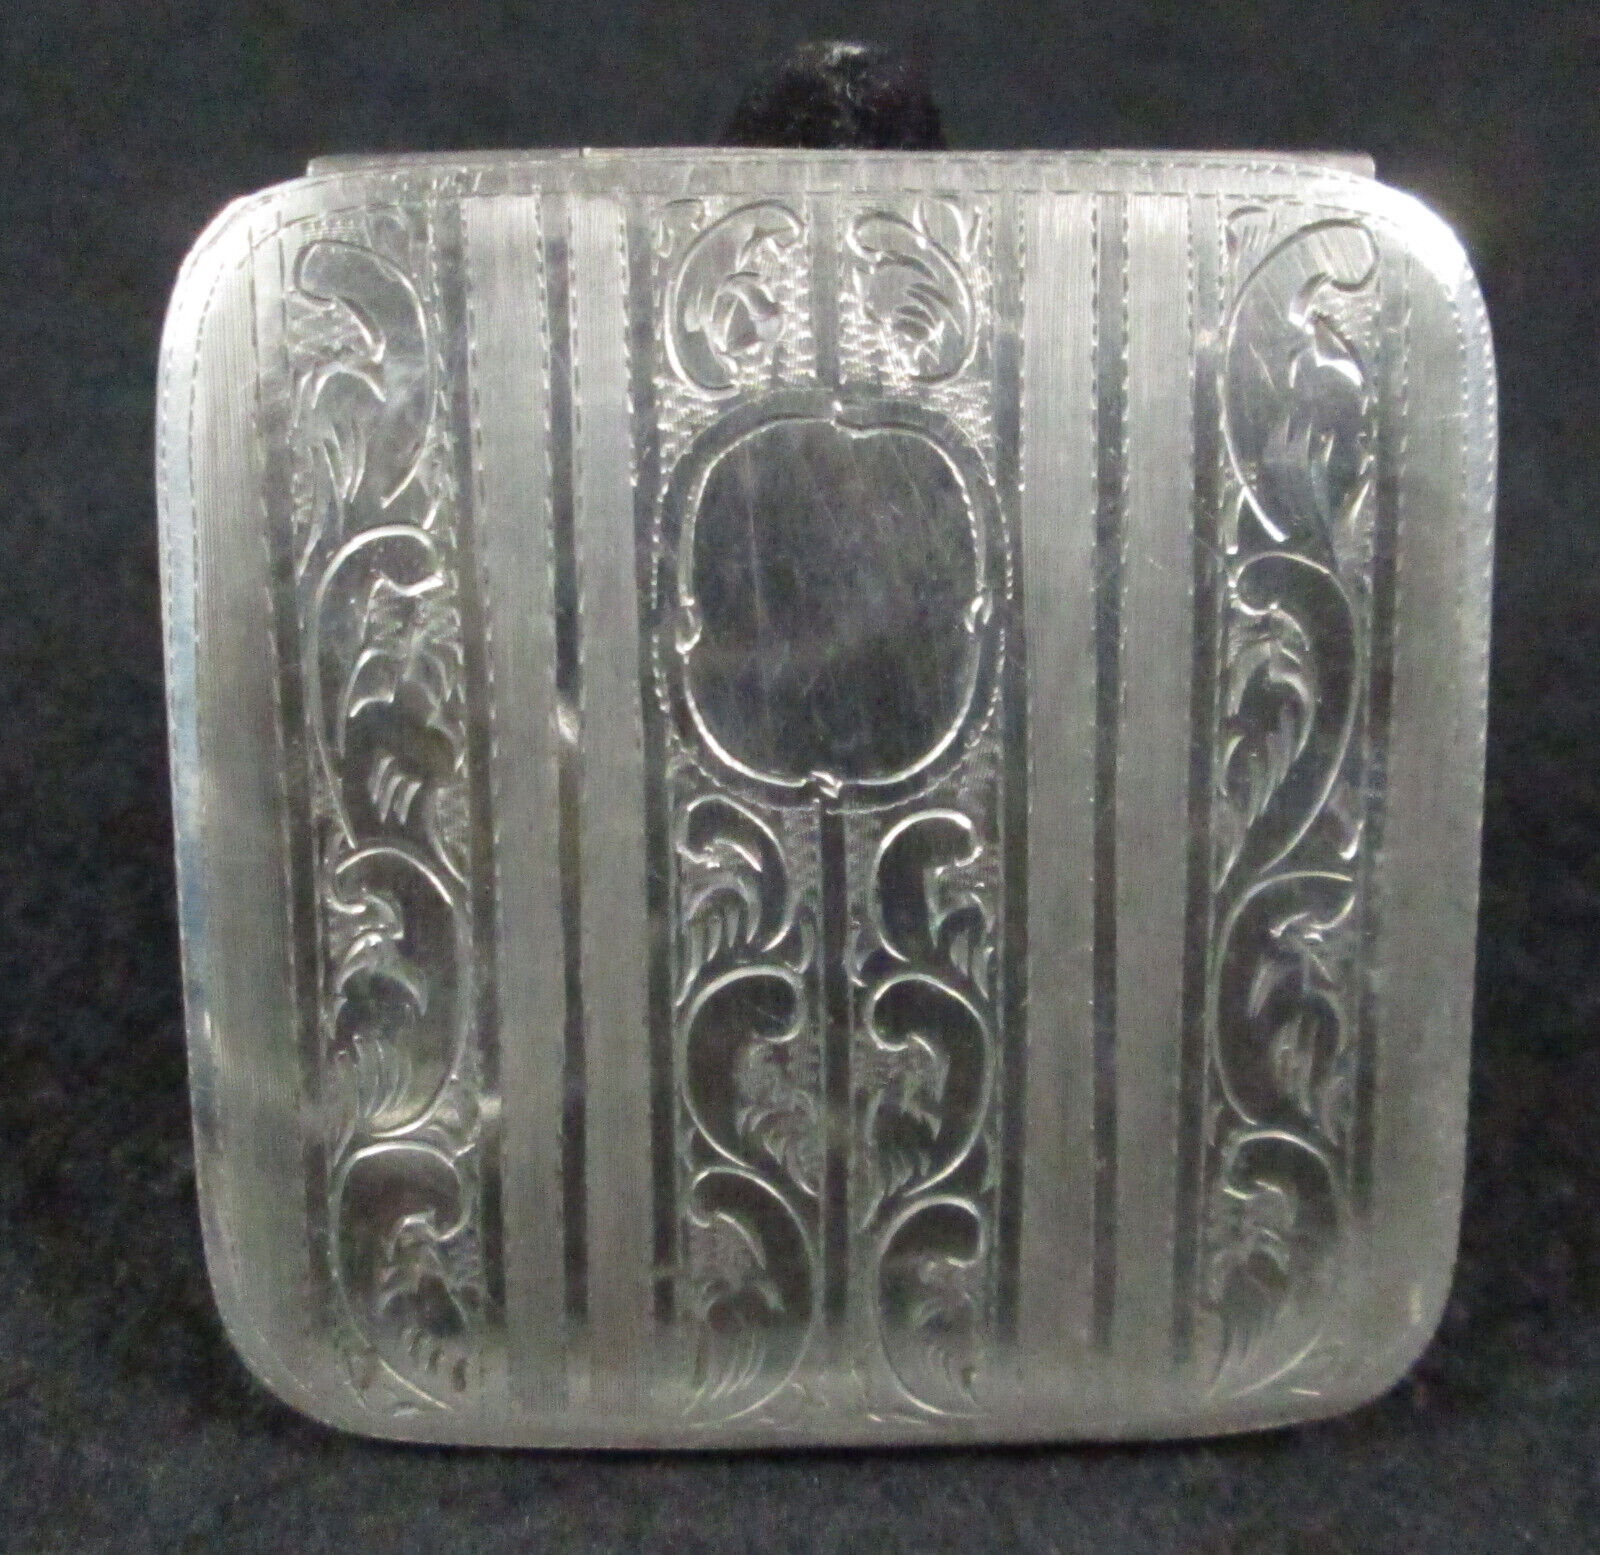 Vintage Circa 1930s Leo Gersting Israel 833 Silver Signed LG Cartoche Compact